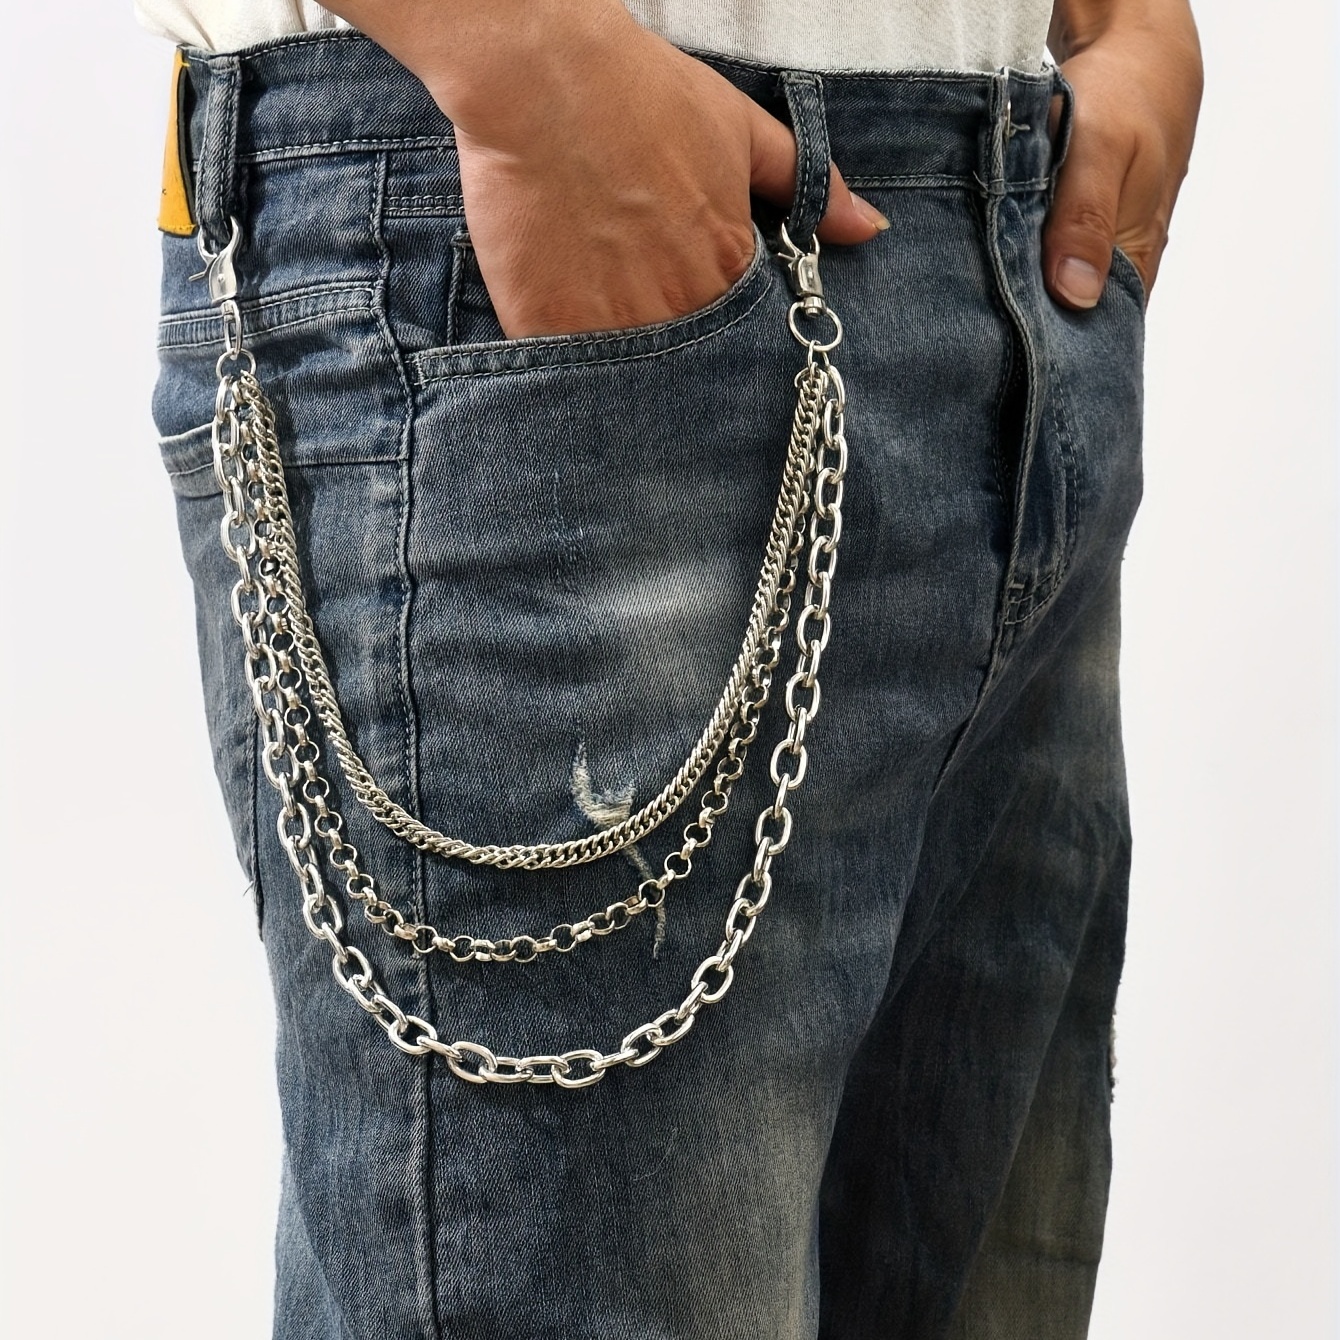 Men Pants Chain Keychain Wallet Chain for Pants Key Chain Simple  Minimalistic Design Small Gift for Him or Her -  Sweden